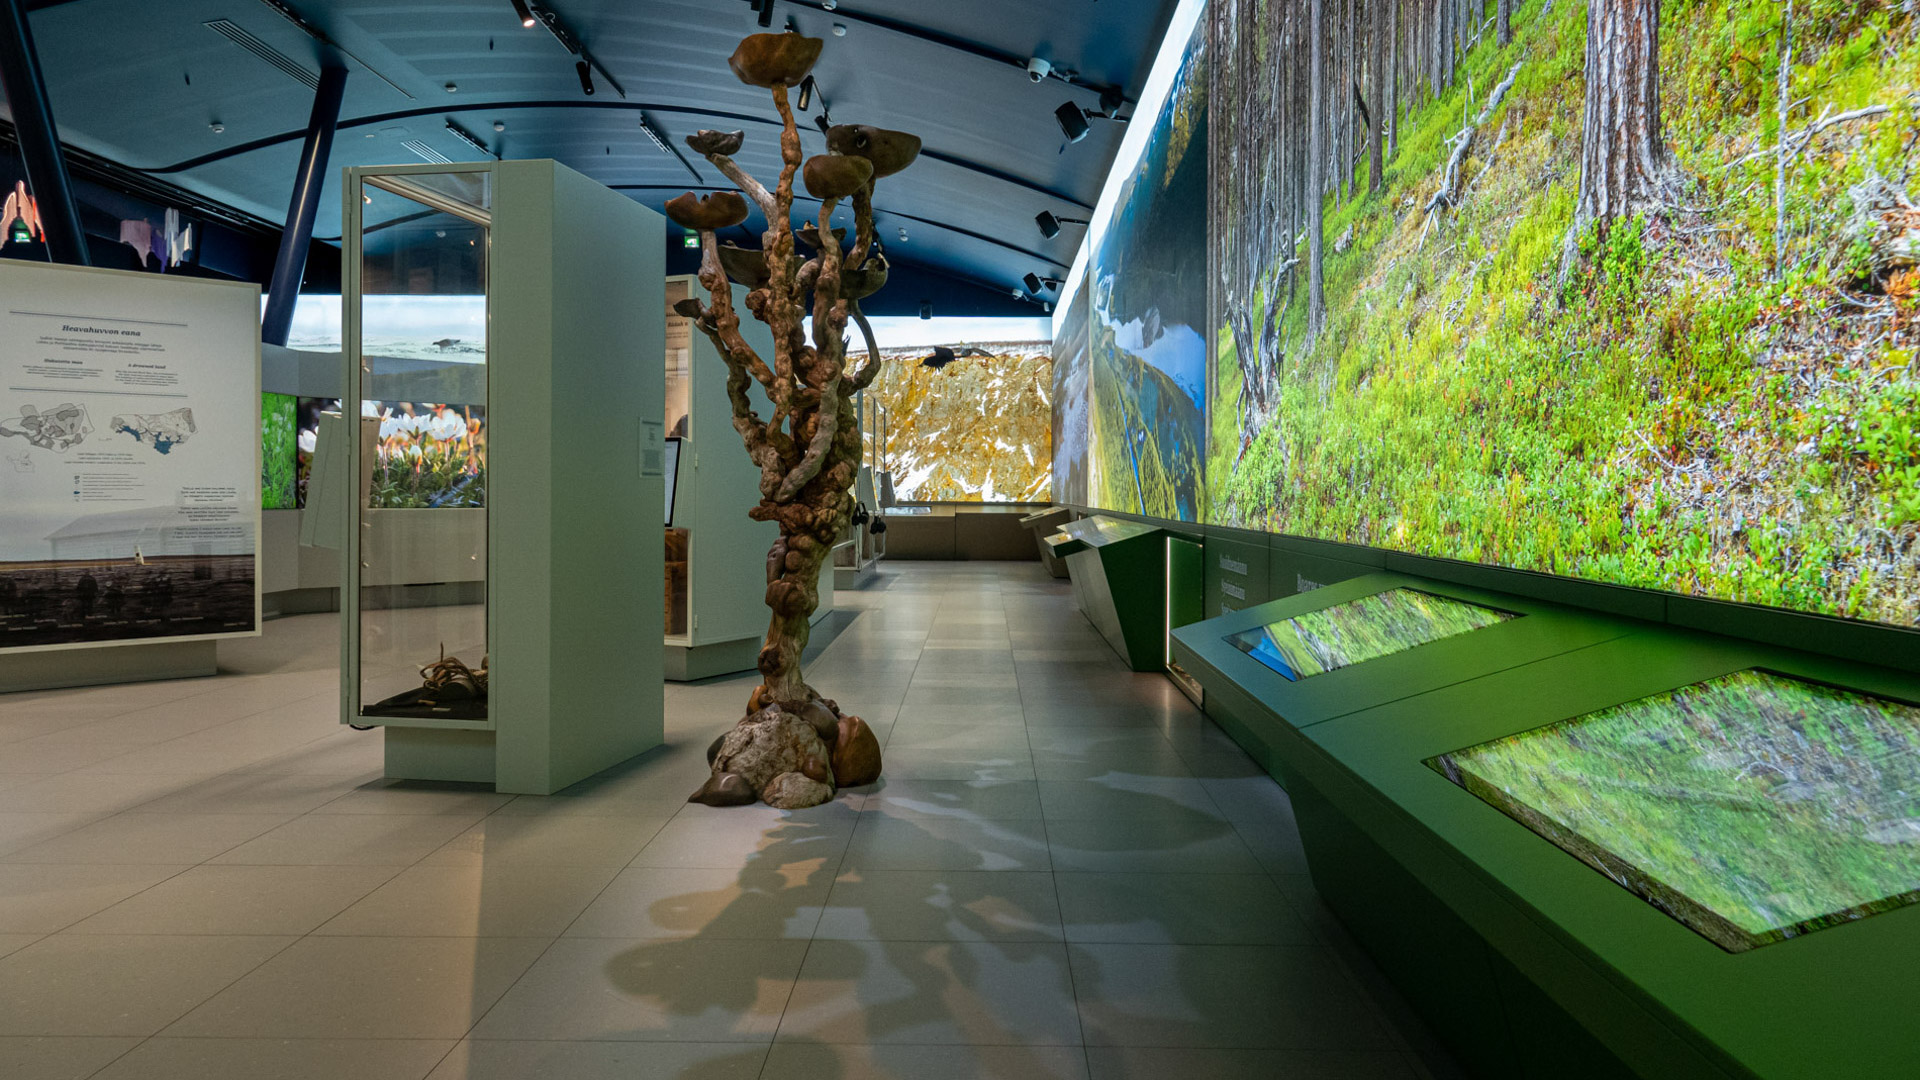 Sámi Museum Siida uses modern video and audio solutions to introduce all guests to the exciting world of the Sámi people, their traditions and the land where they live.